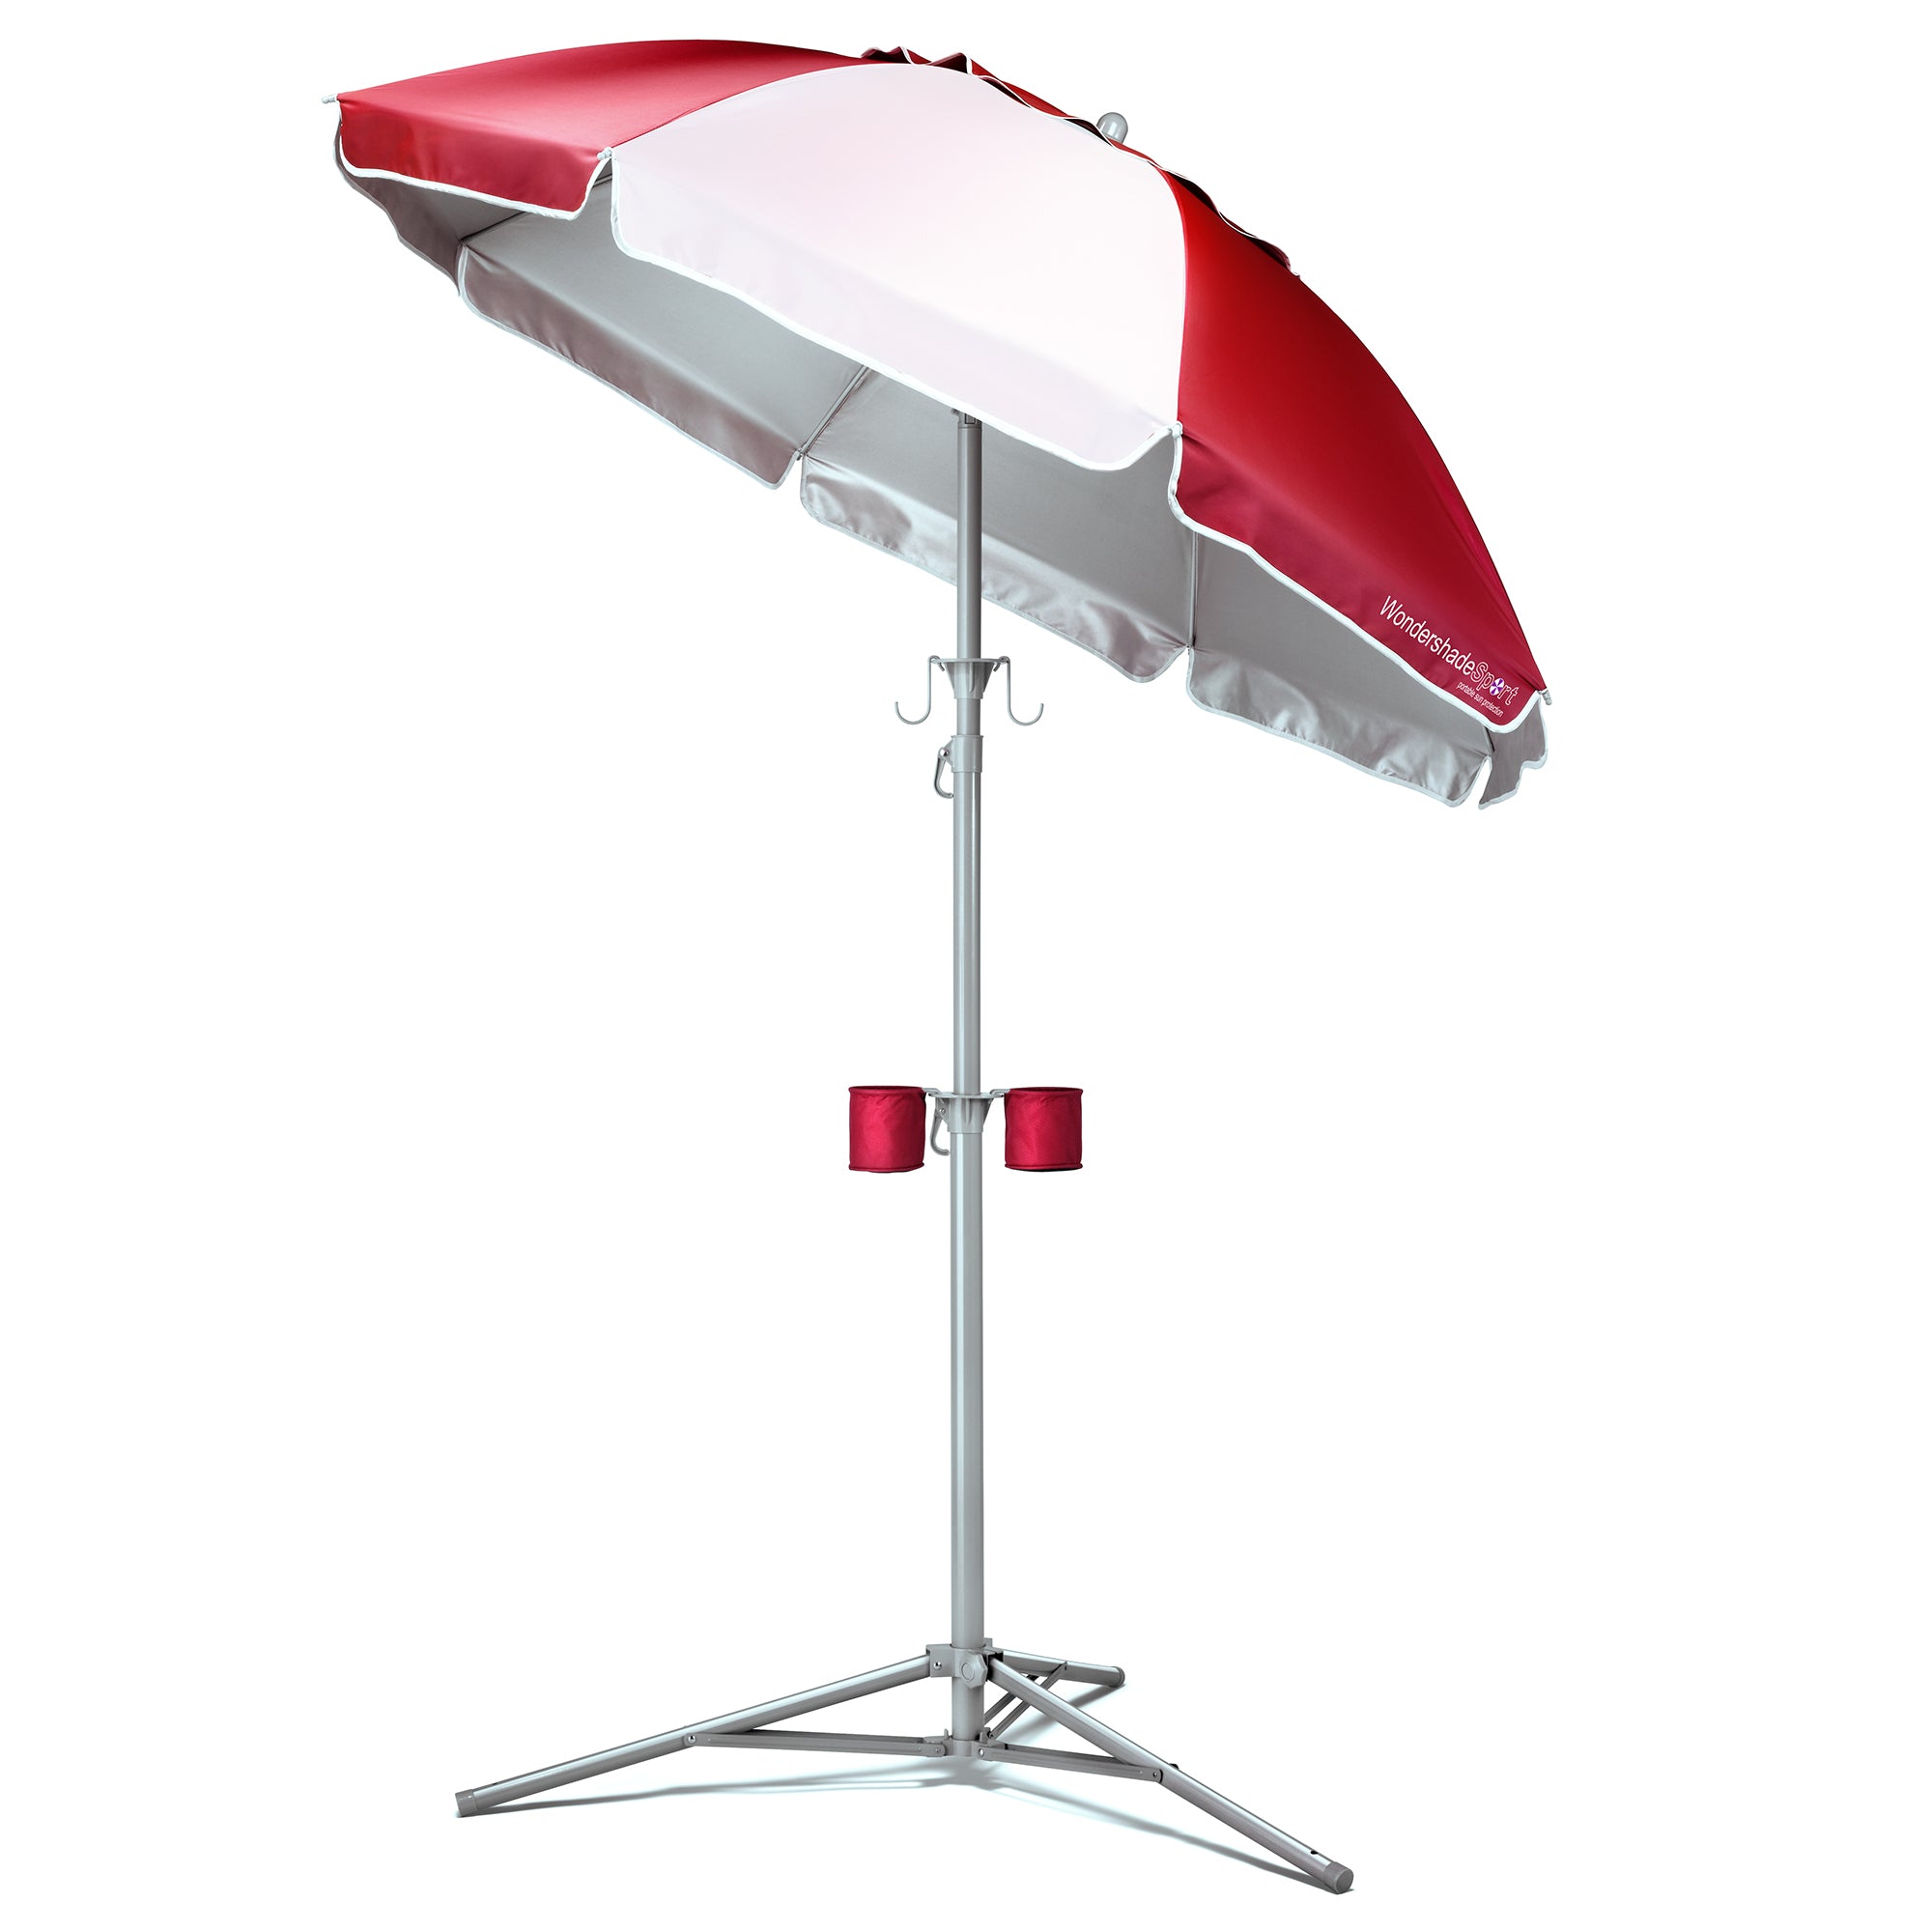 Wondershade Portable Sun Shade red/white, with cupholders